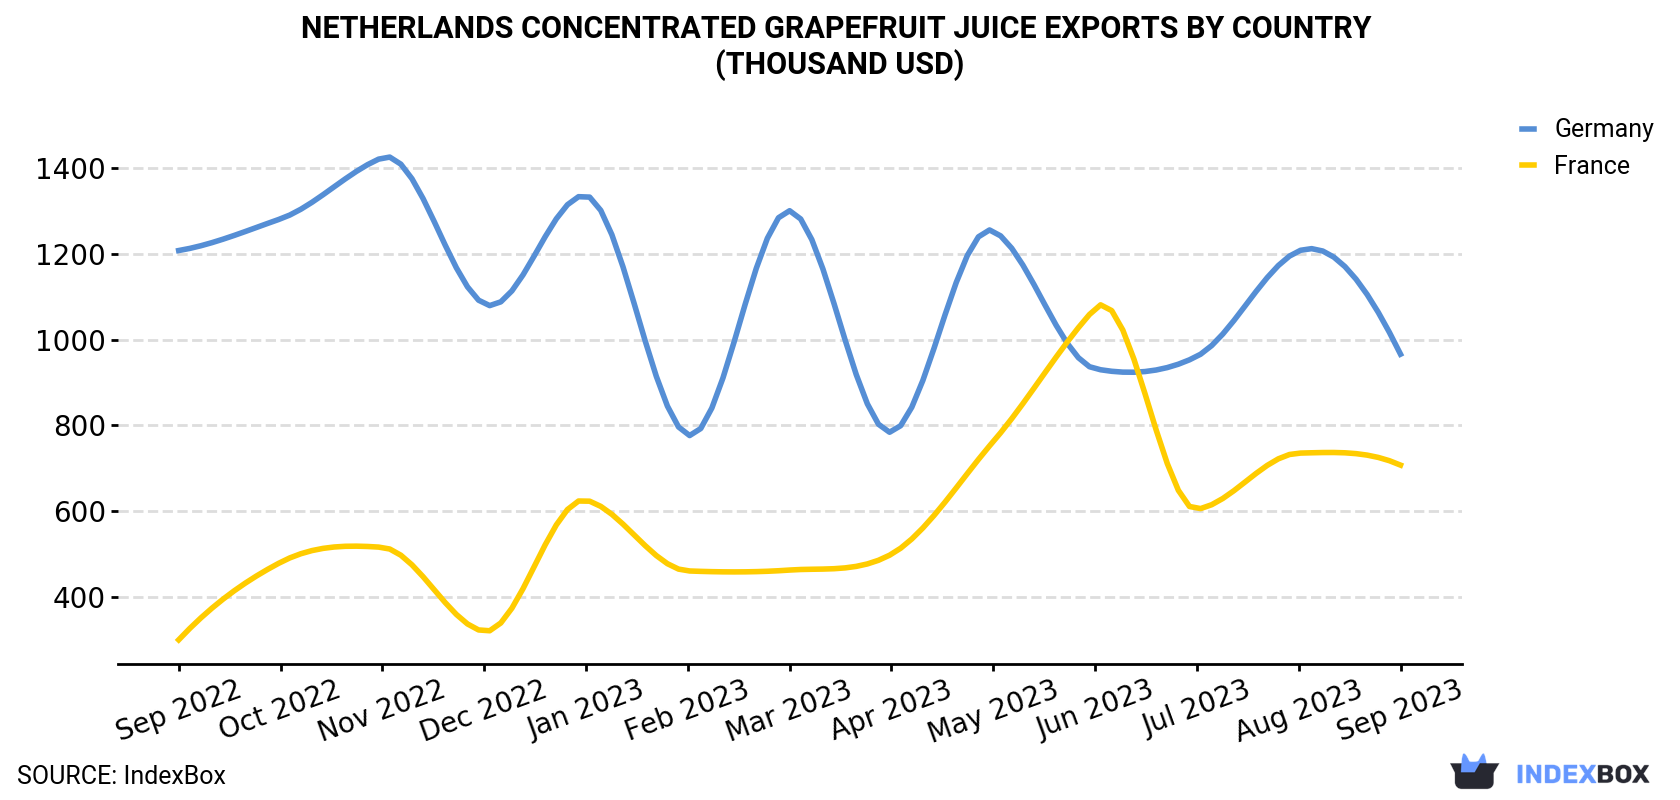 Netherlands Concentrated Grapefruit Juice Exports By Country (Thousand USD)